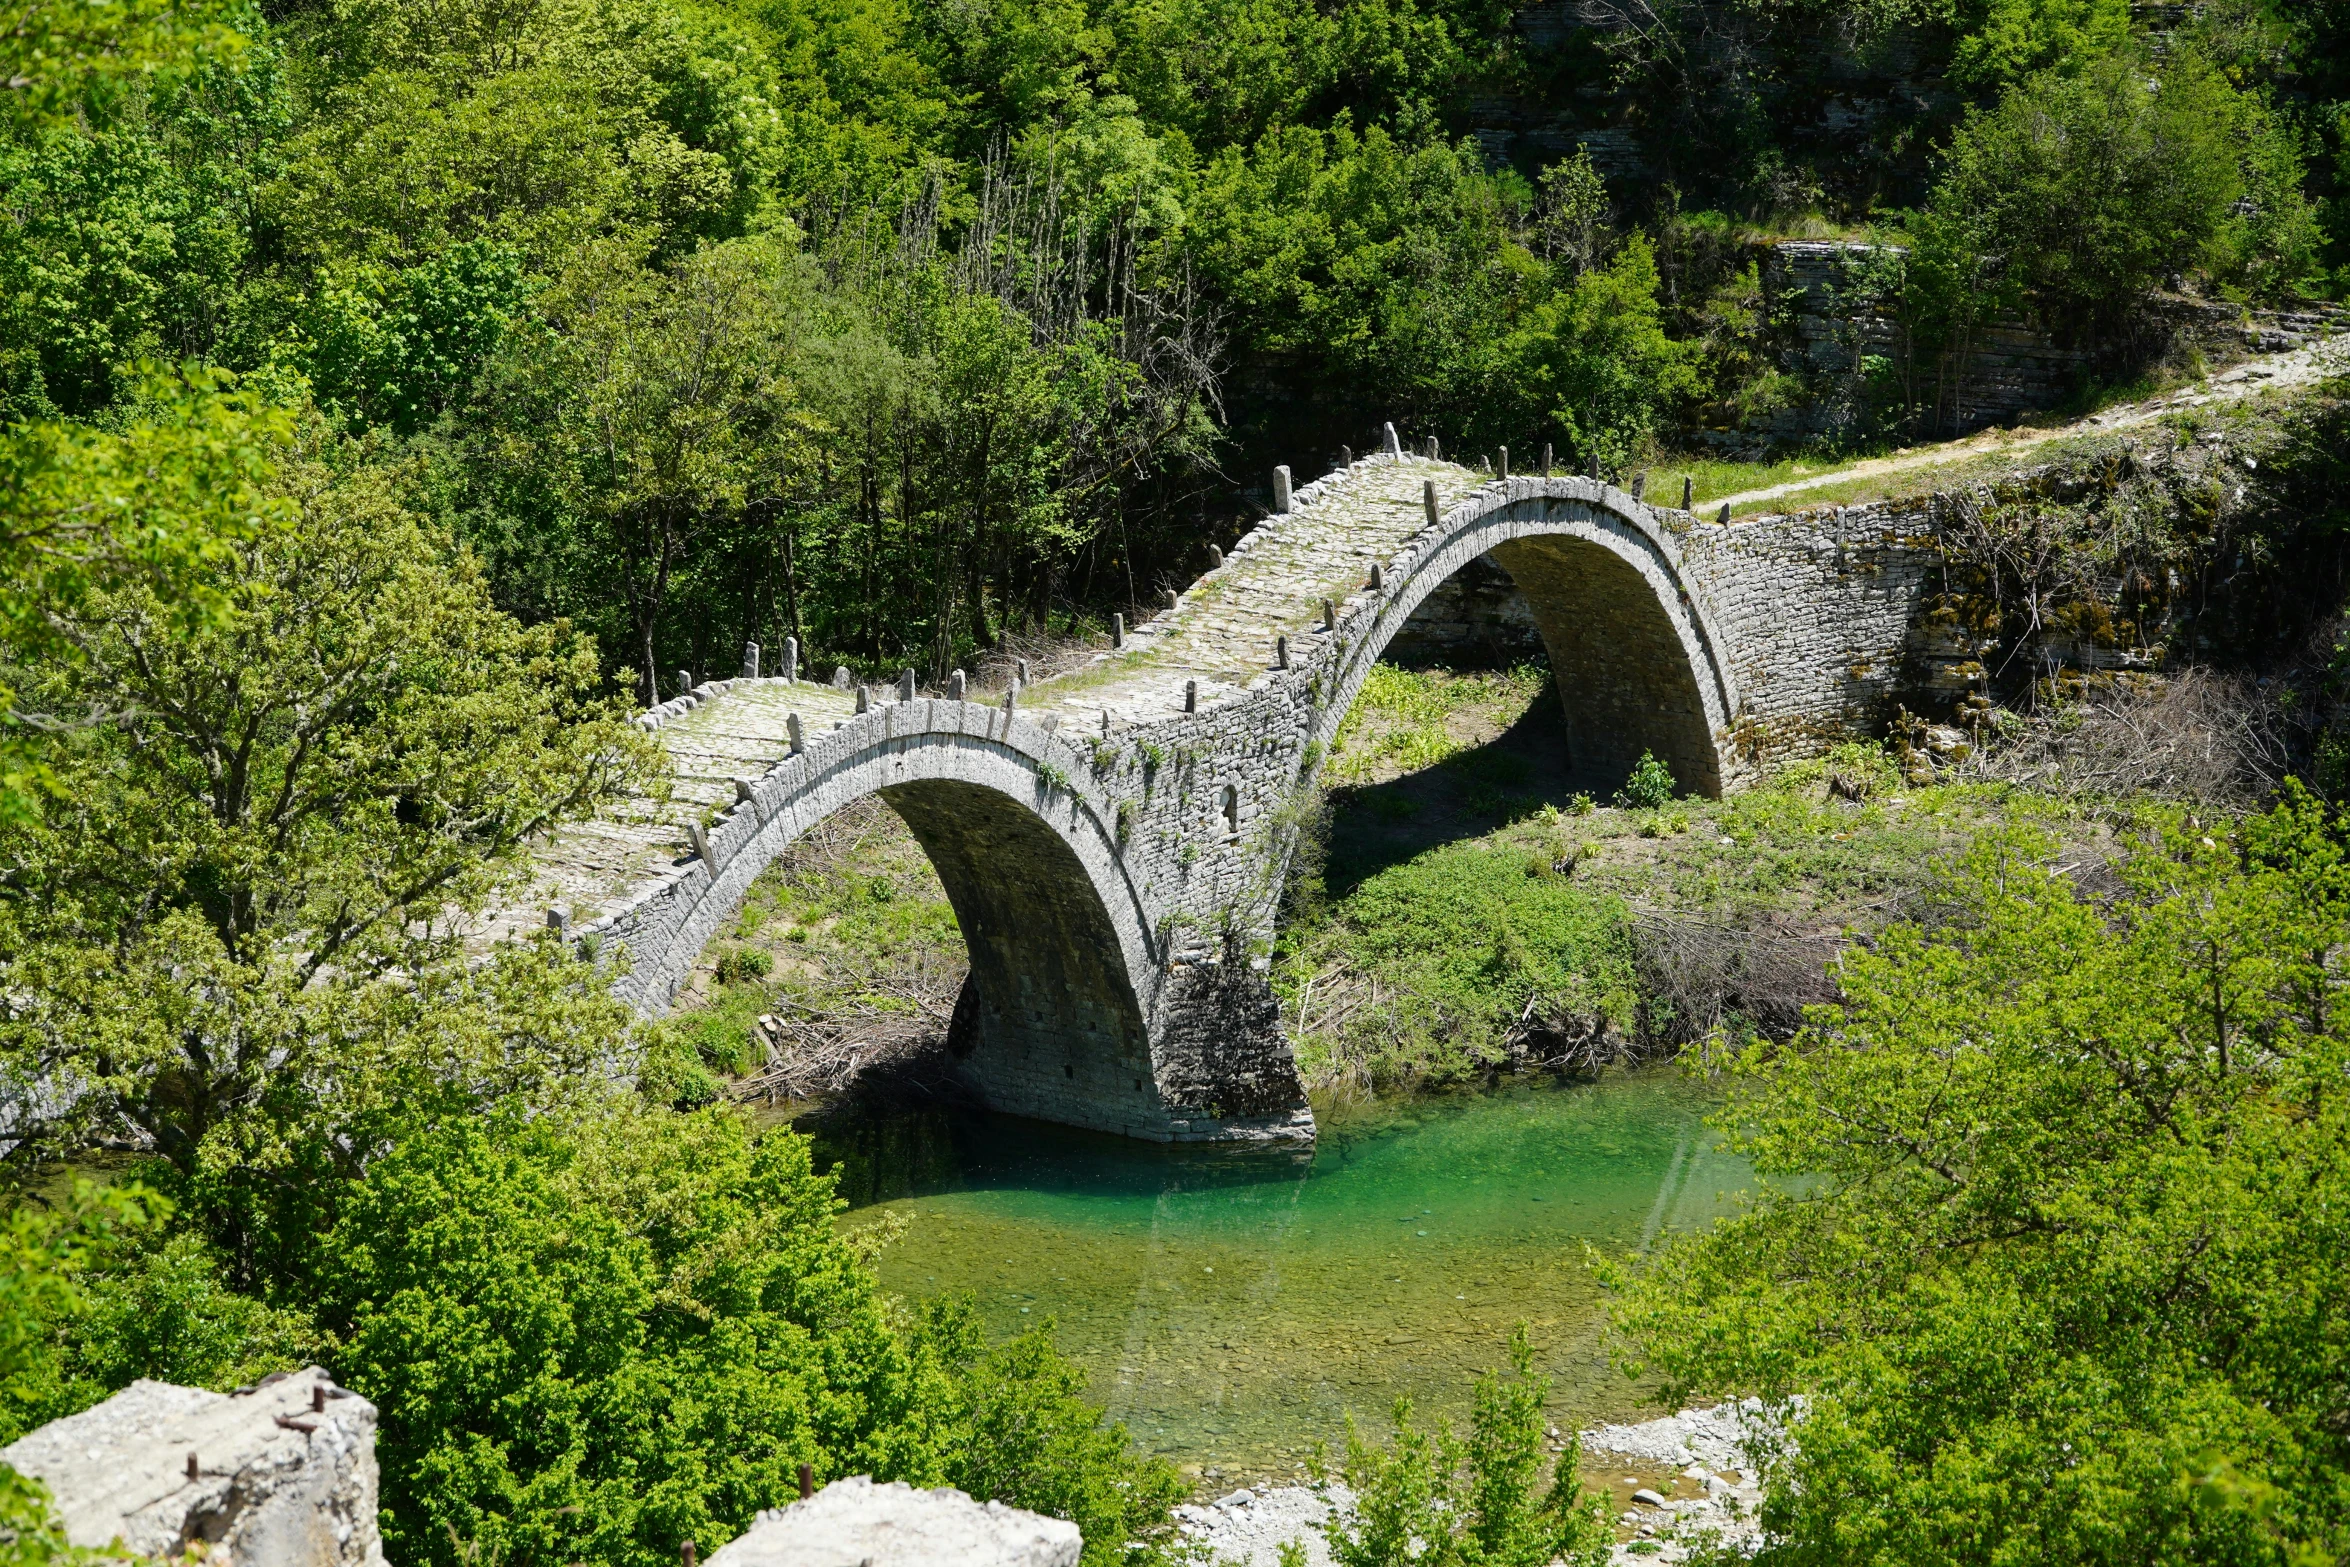 an old stone bridge crosses a river near some trees